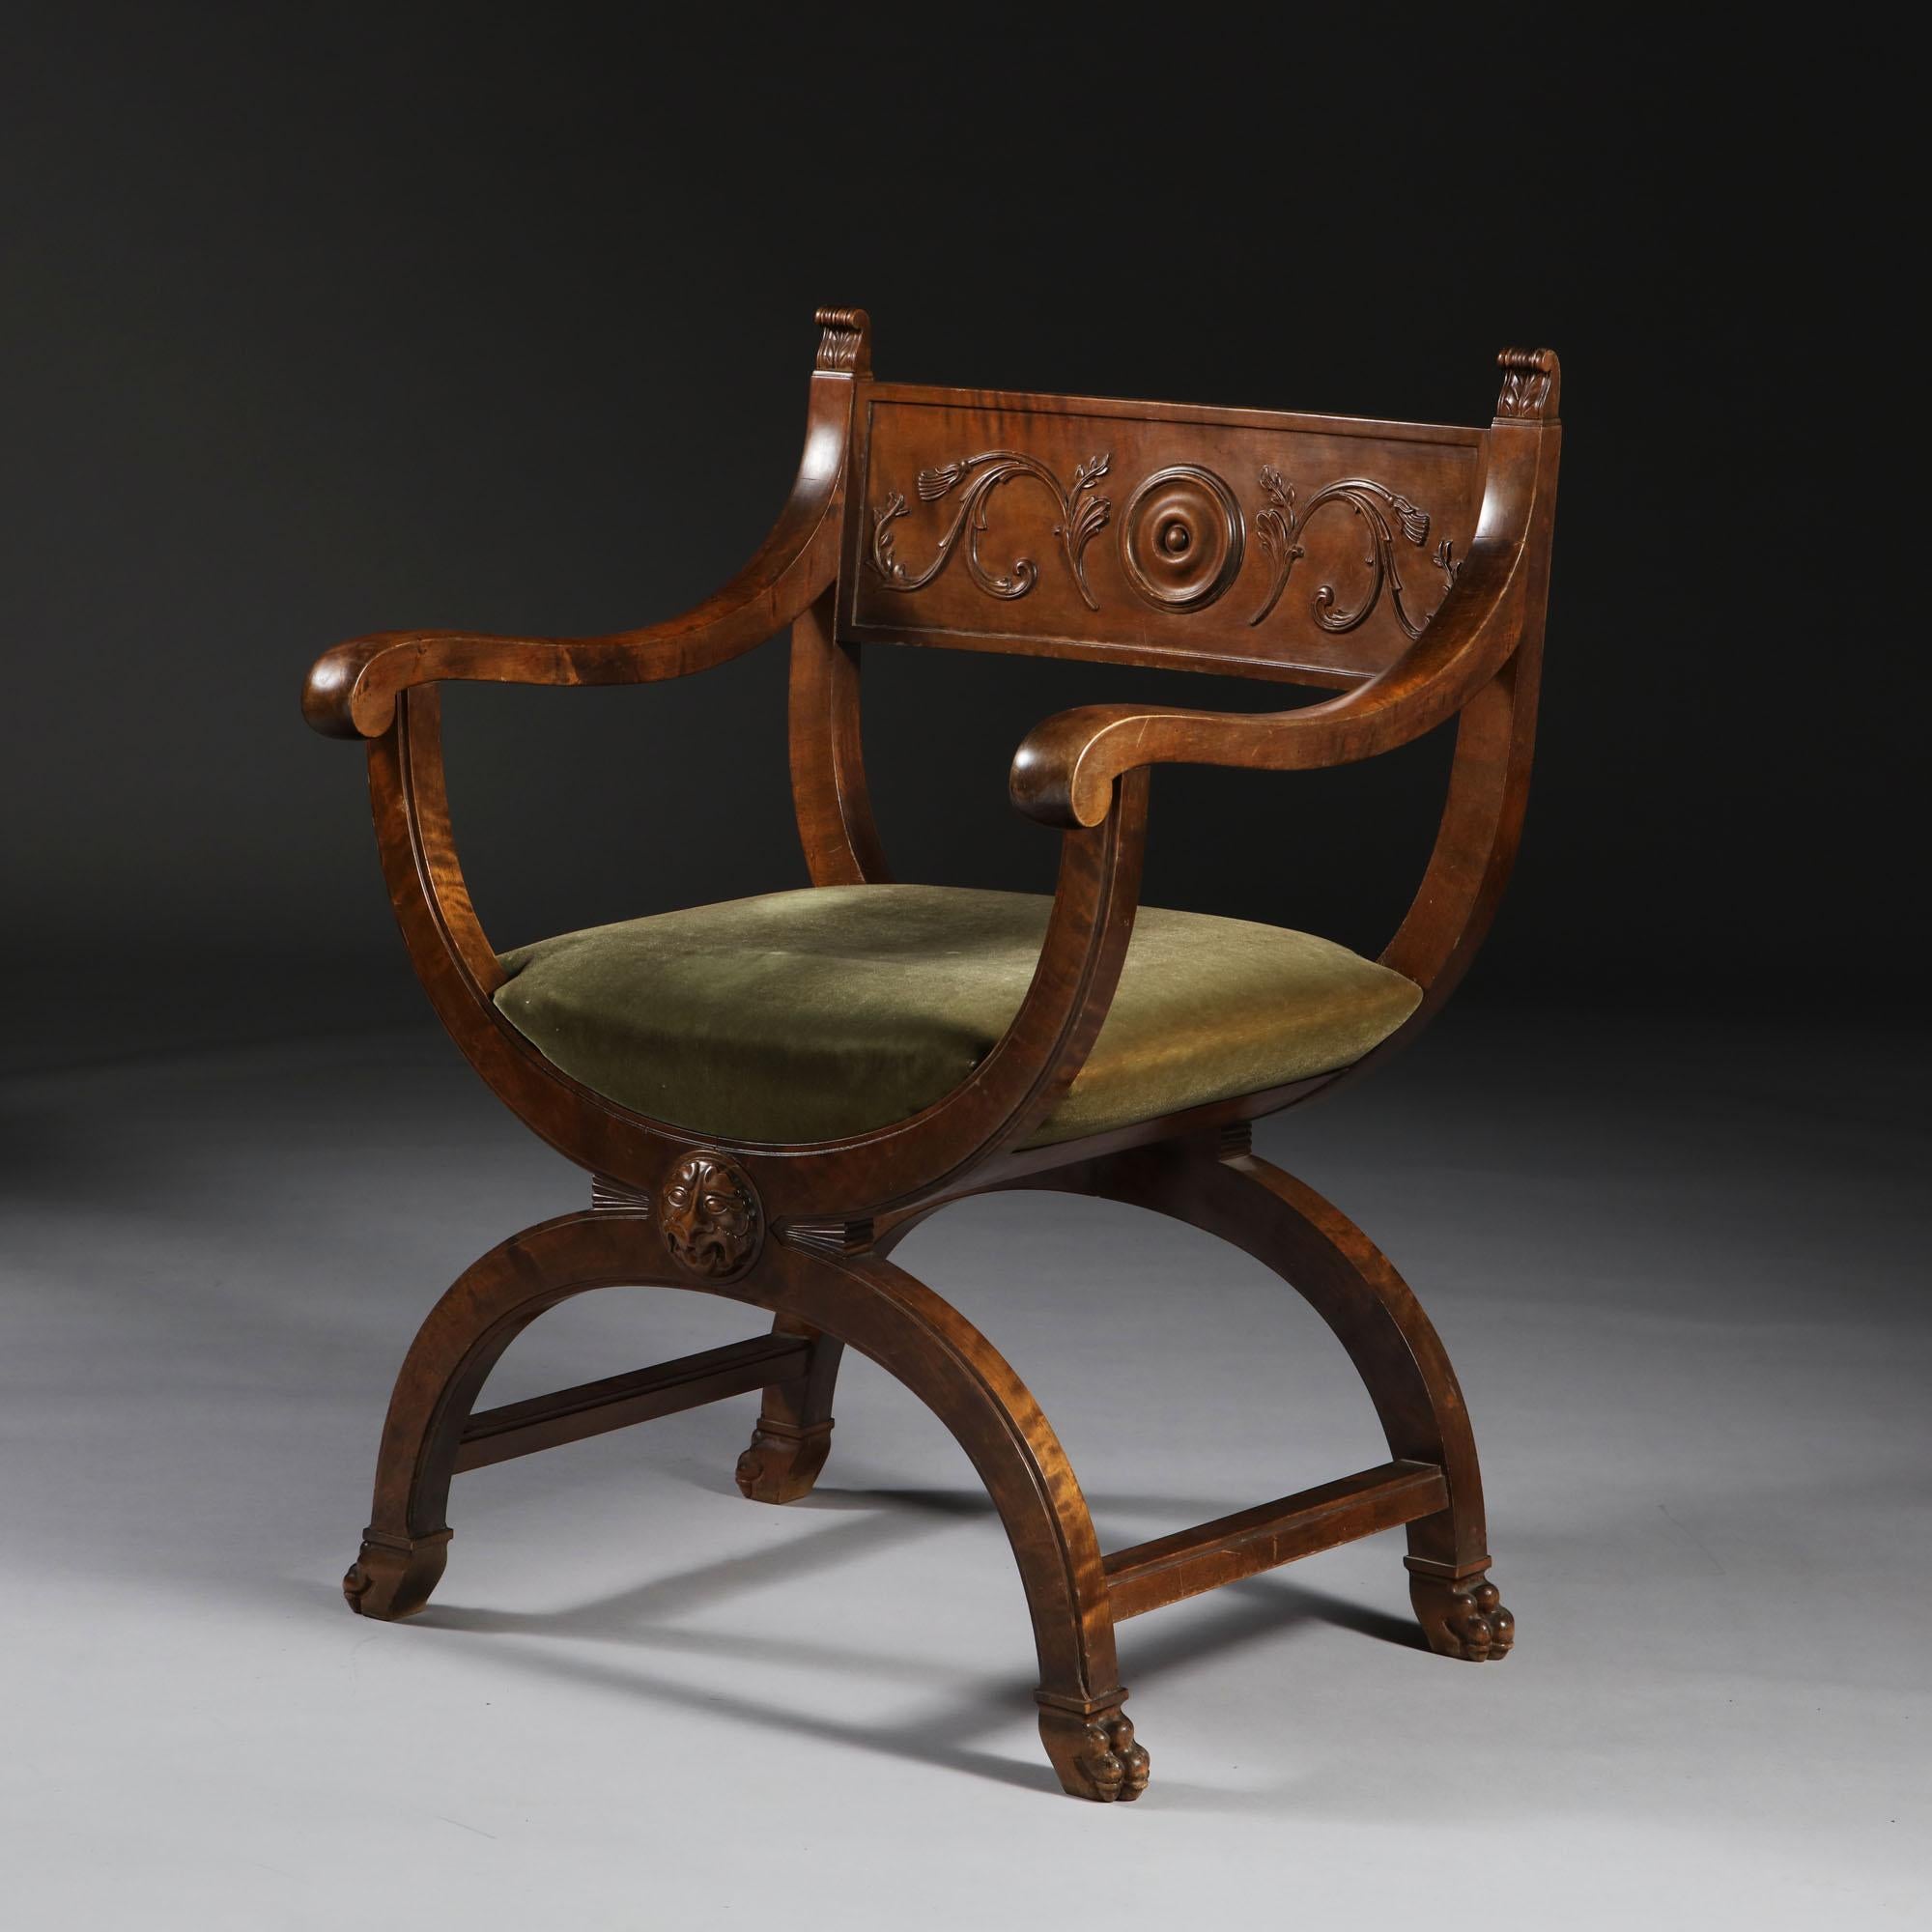 A fine Swedish stained birch X-frame armchair, with central medallion surrounded by scrolling carving to the back, surmounted by carved acanthus leaf finials, with scroll arms and a lions mask to the front cross bar, all supported on four hairy paw